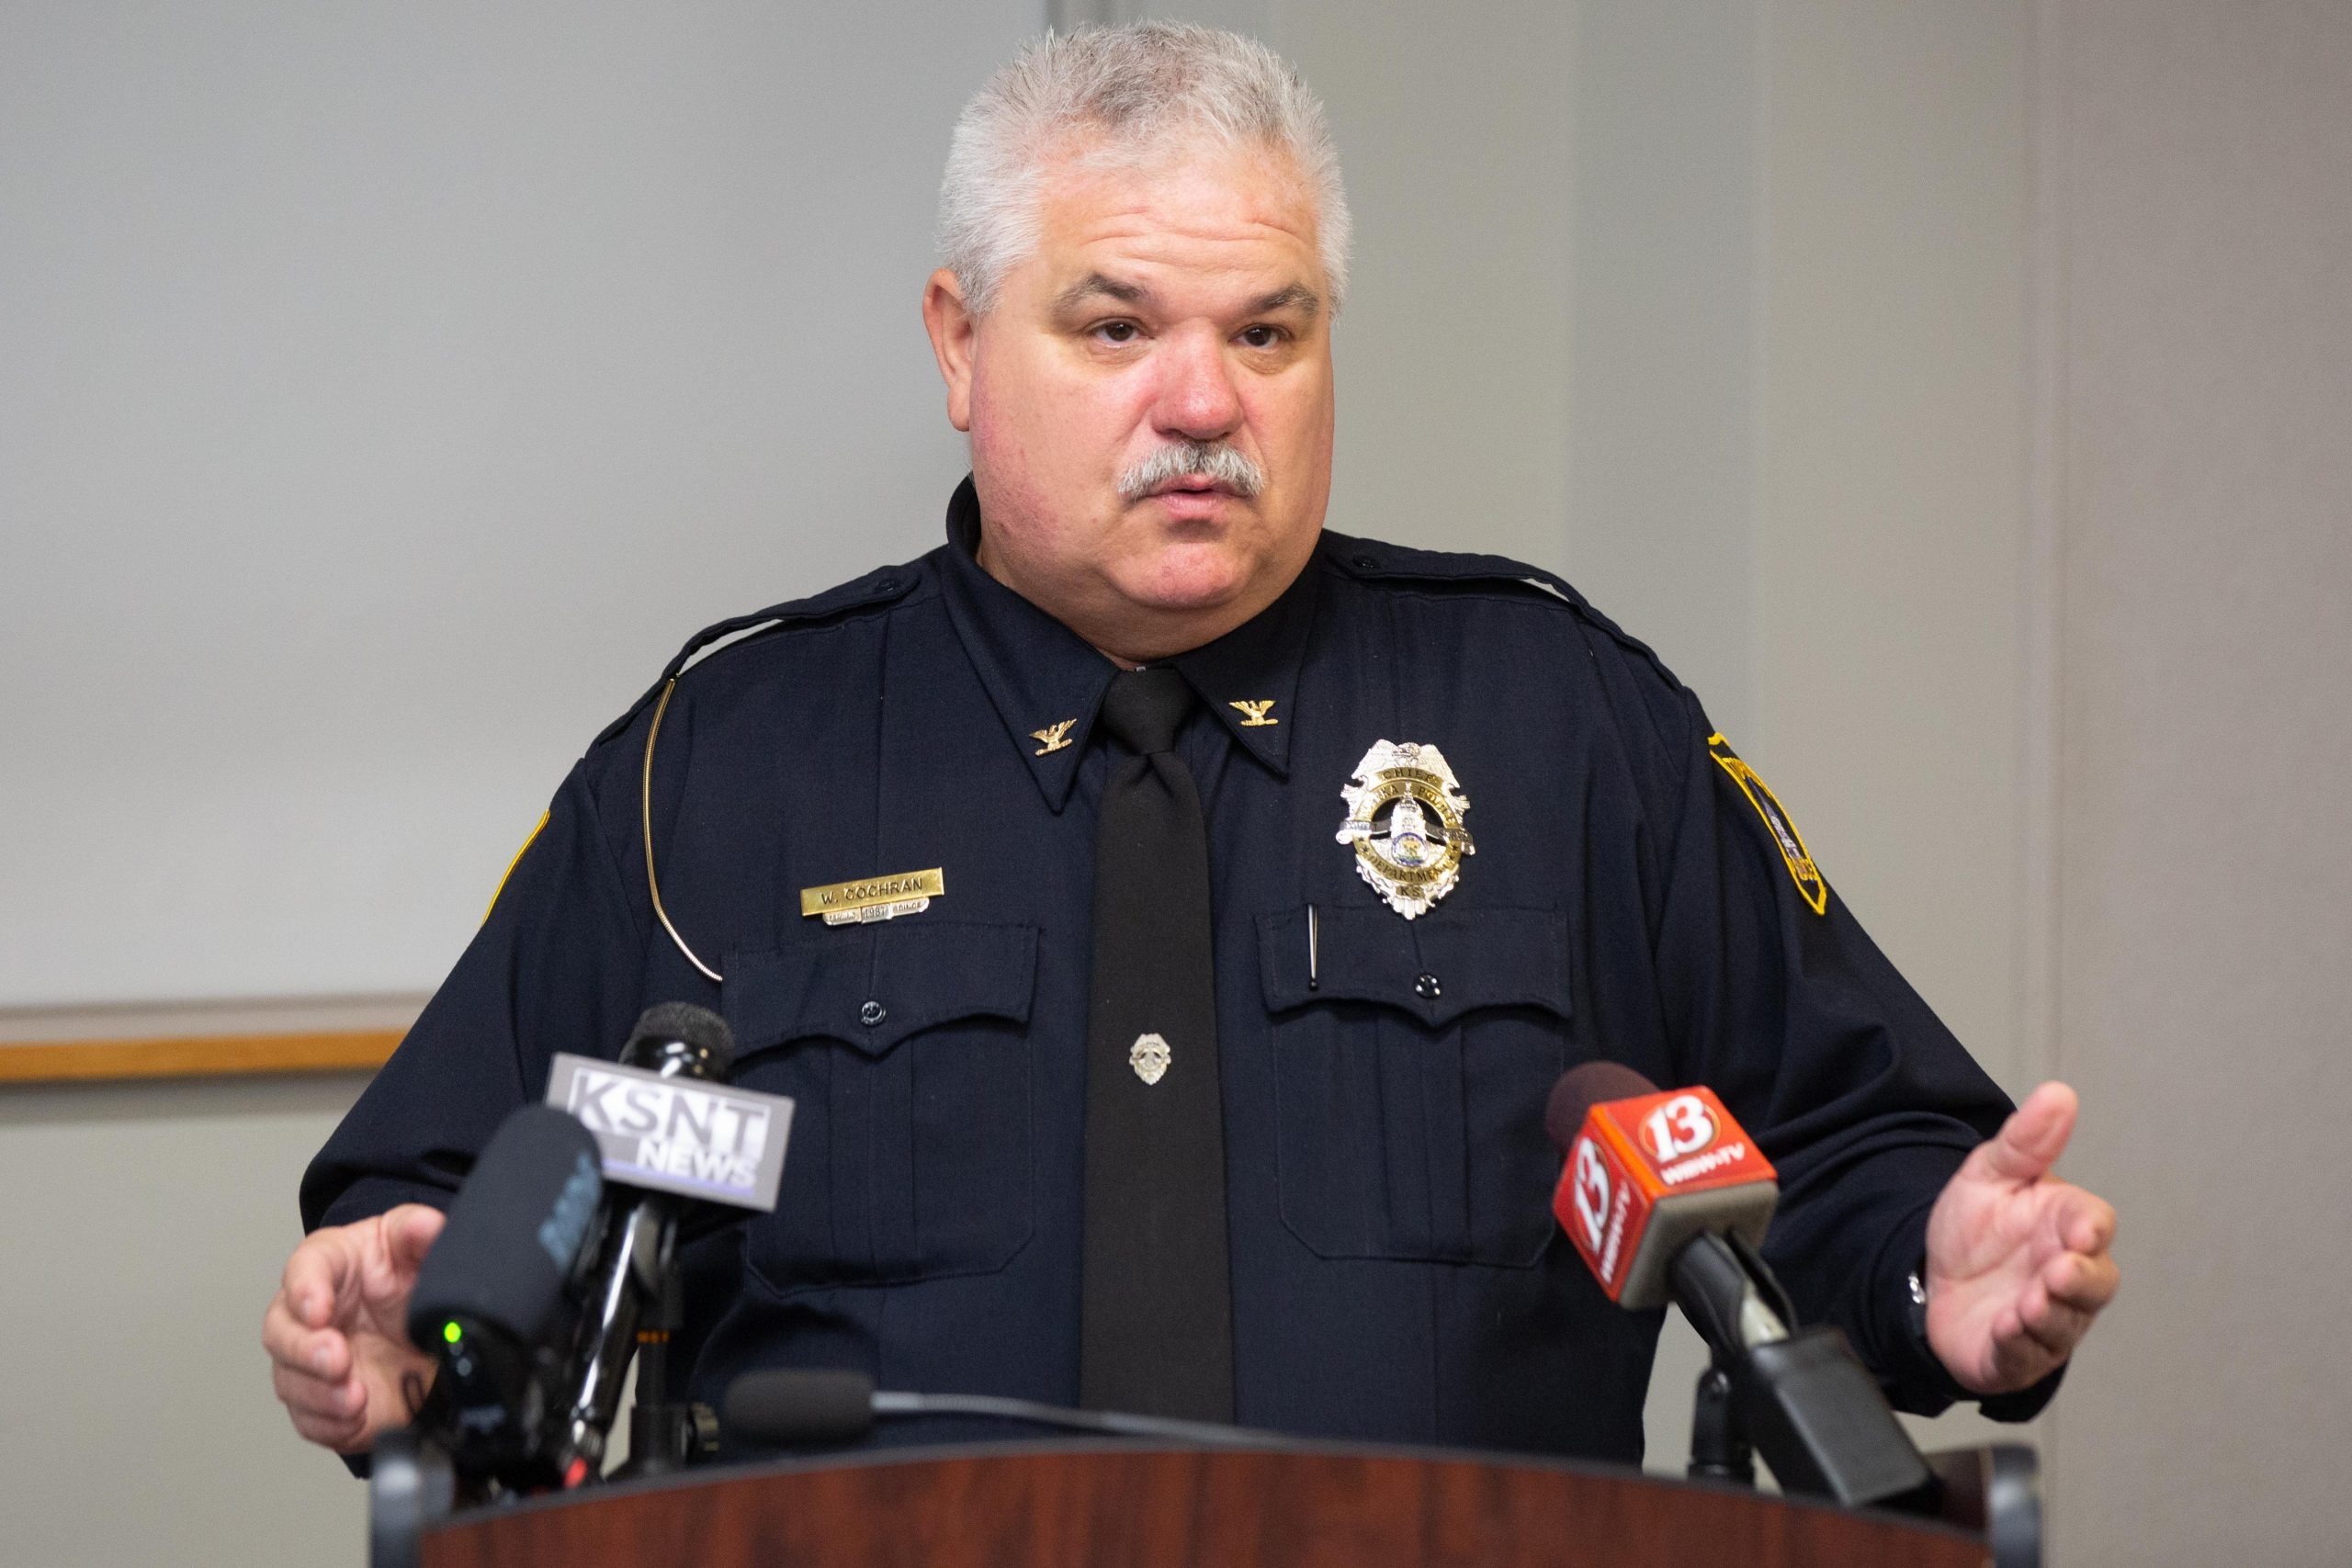 Topeka police reveal changes to response protocols